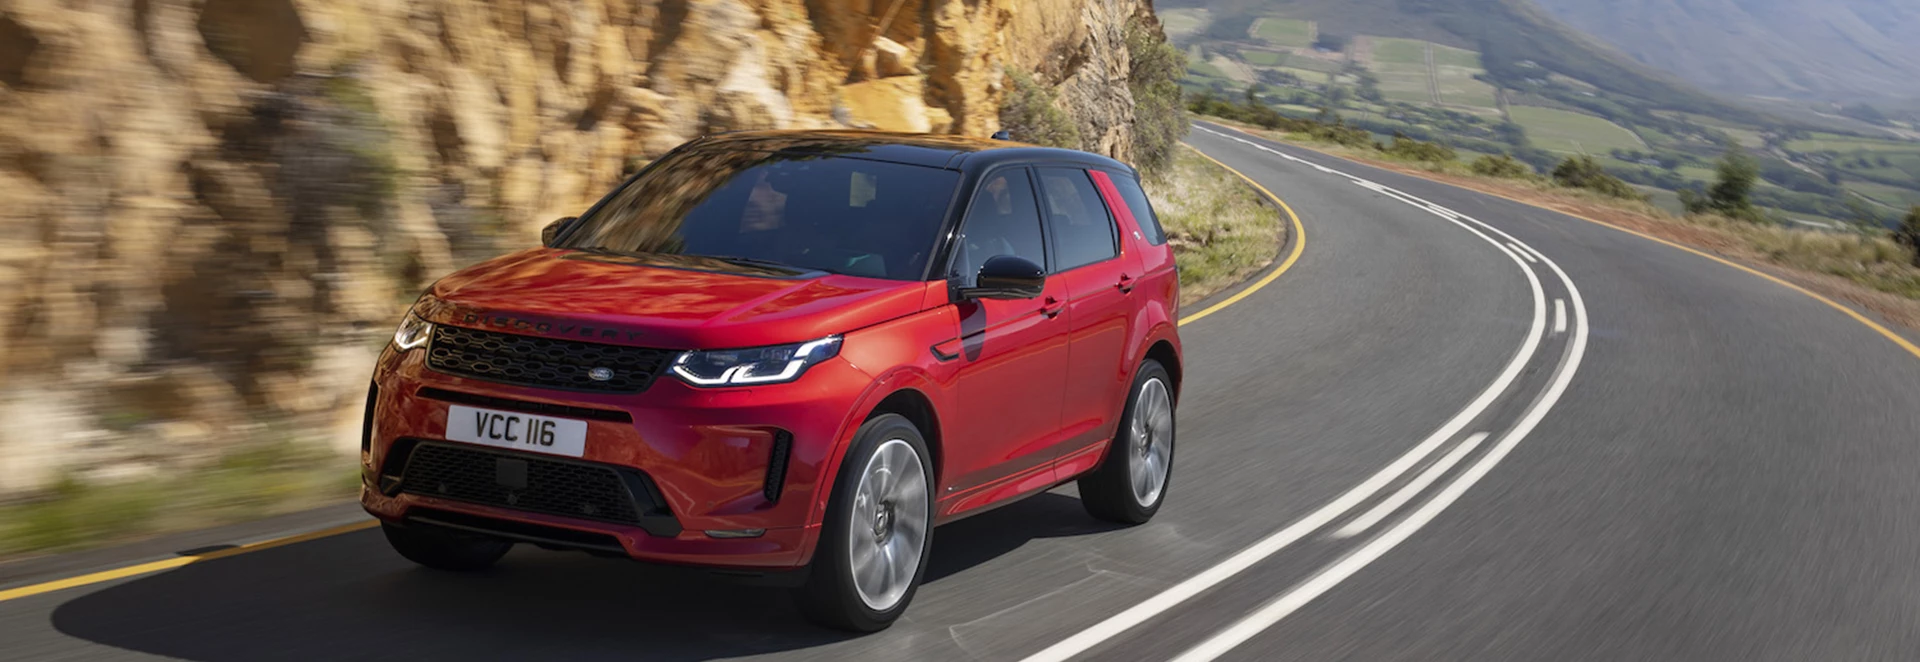 Facelifted Land Rover Discovery Sport revealed